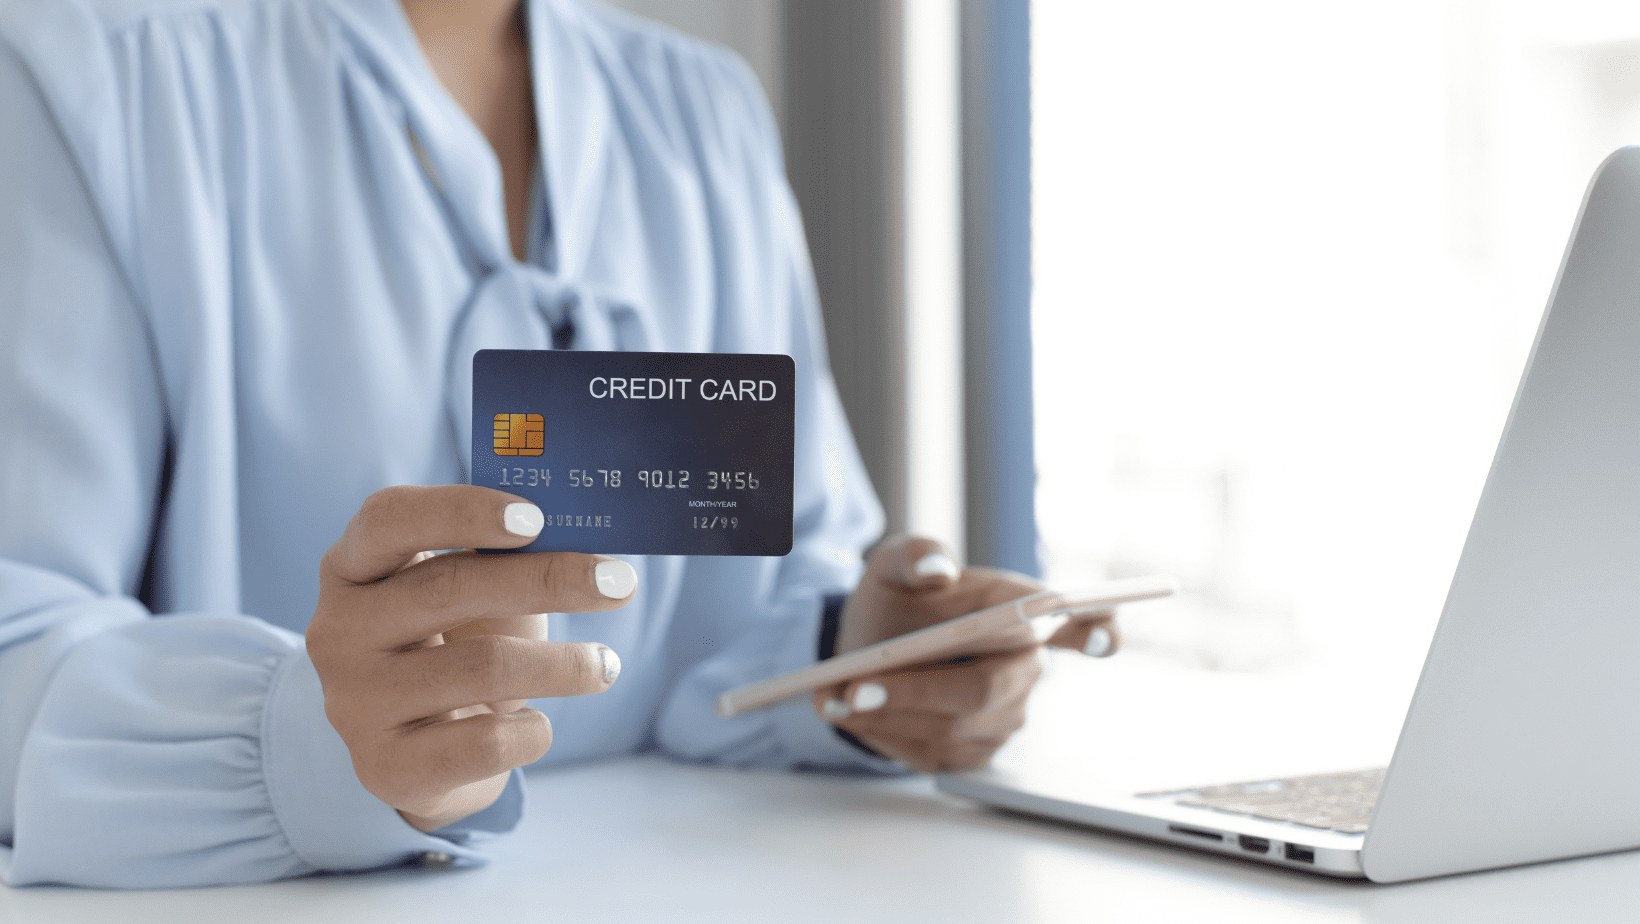 Business Credit Cards for Travel